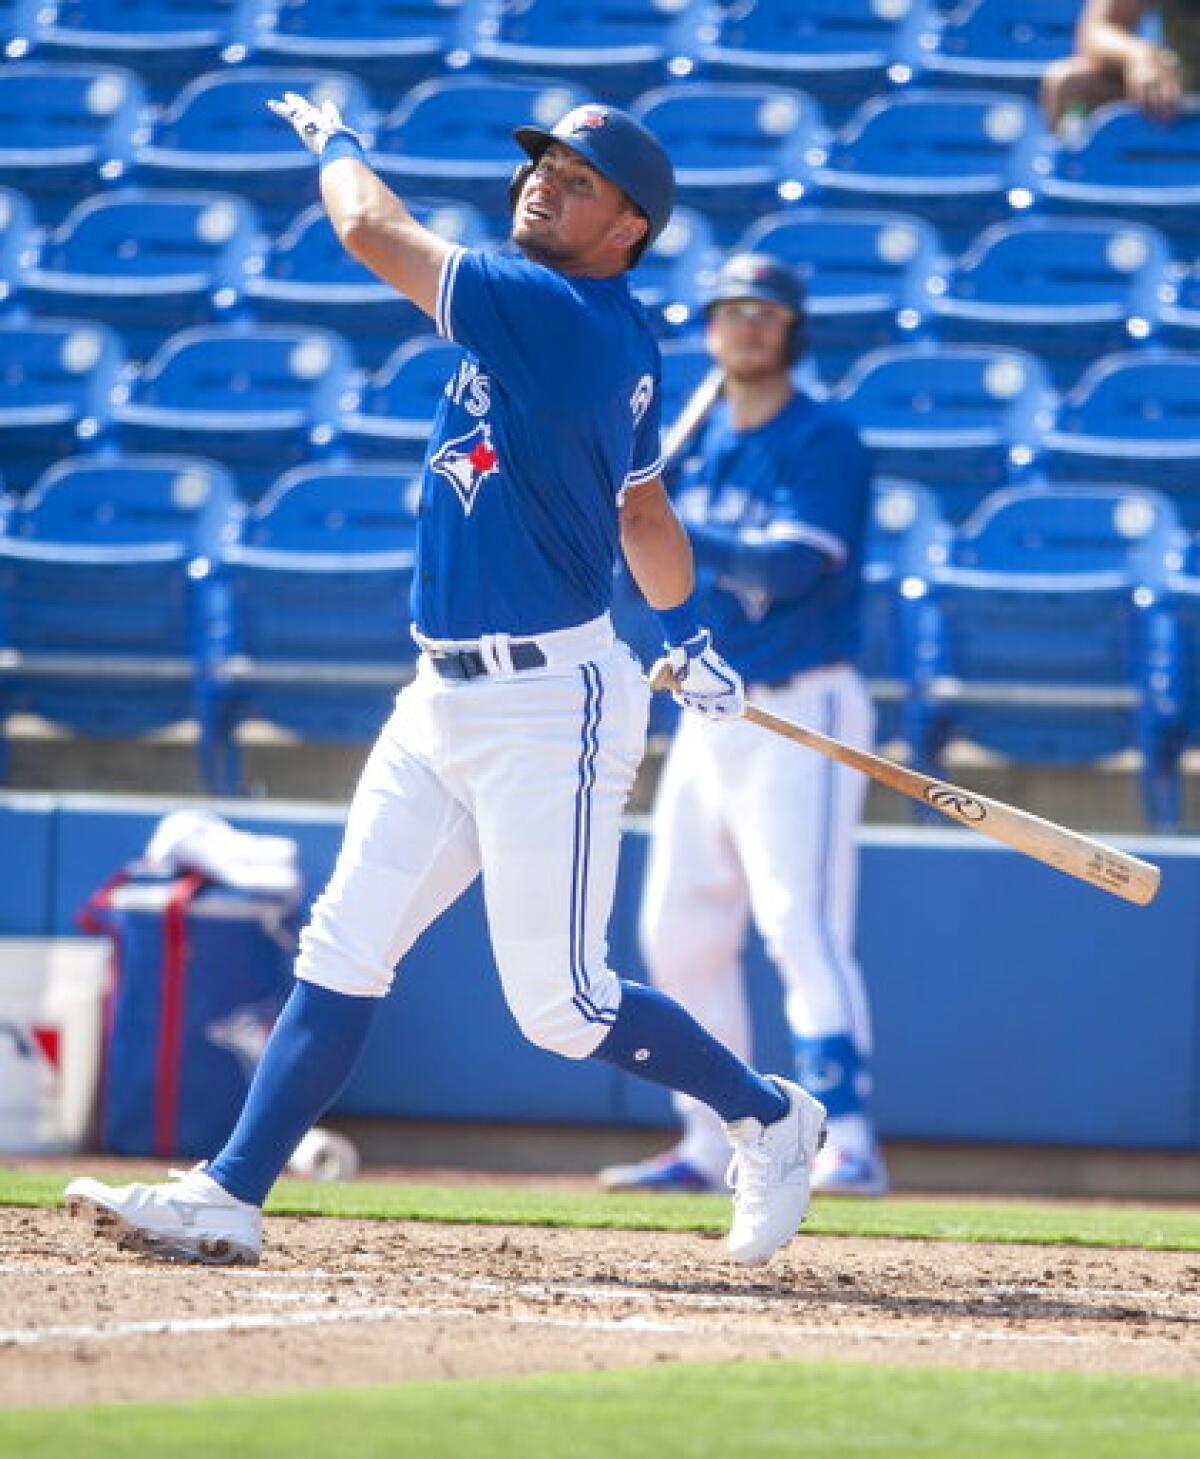 Toronto Blue Jays' Joie Panik hits an RBI-single during the third inning of a spring training baseball game against the Baltimore Orioles, Friday, March 5, 2021, at TD Ballpark in Dunedin, Fla. (Steve Nesius/The Canadian Press via AP)